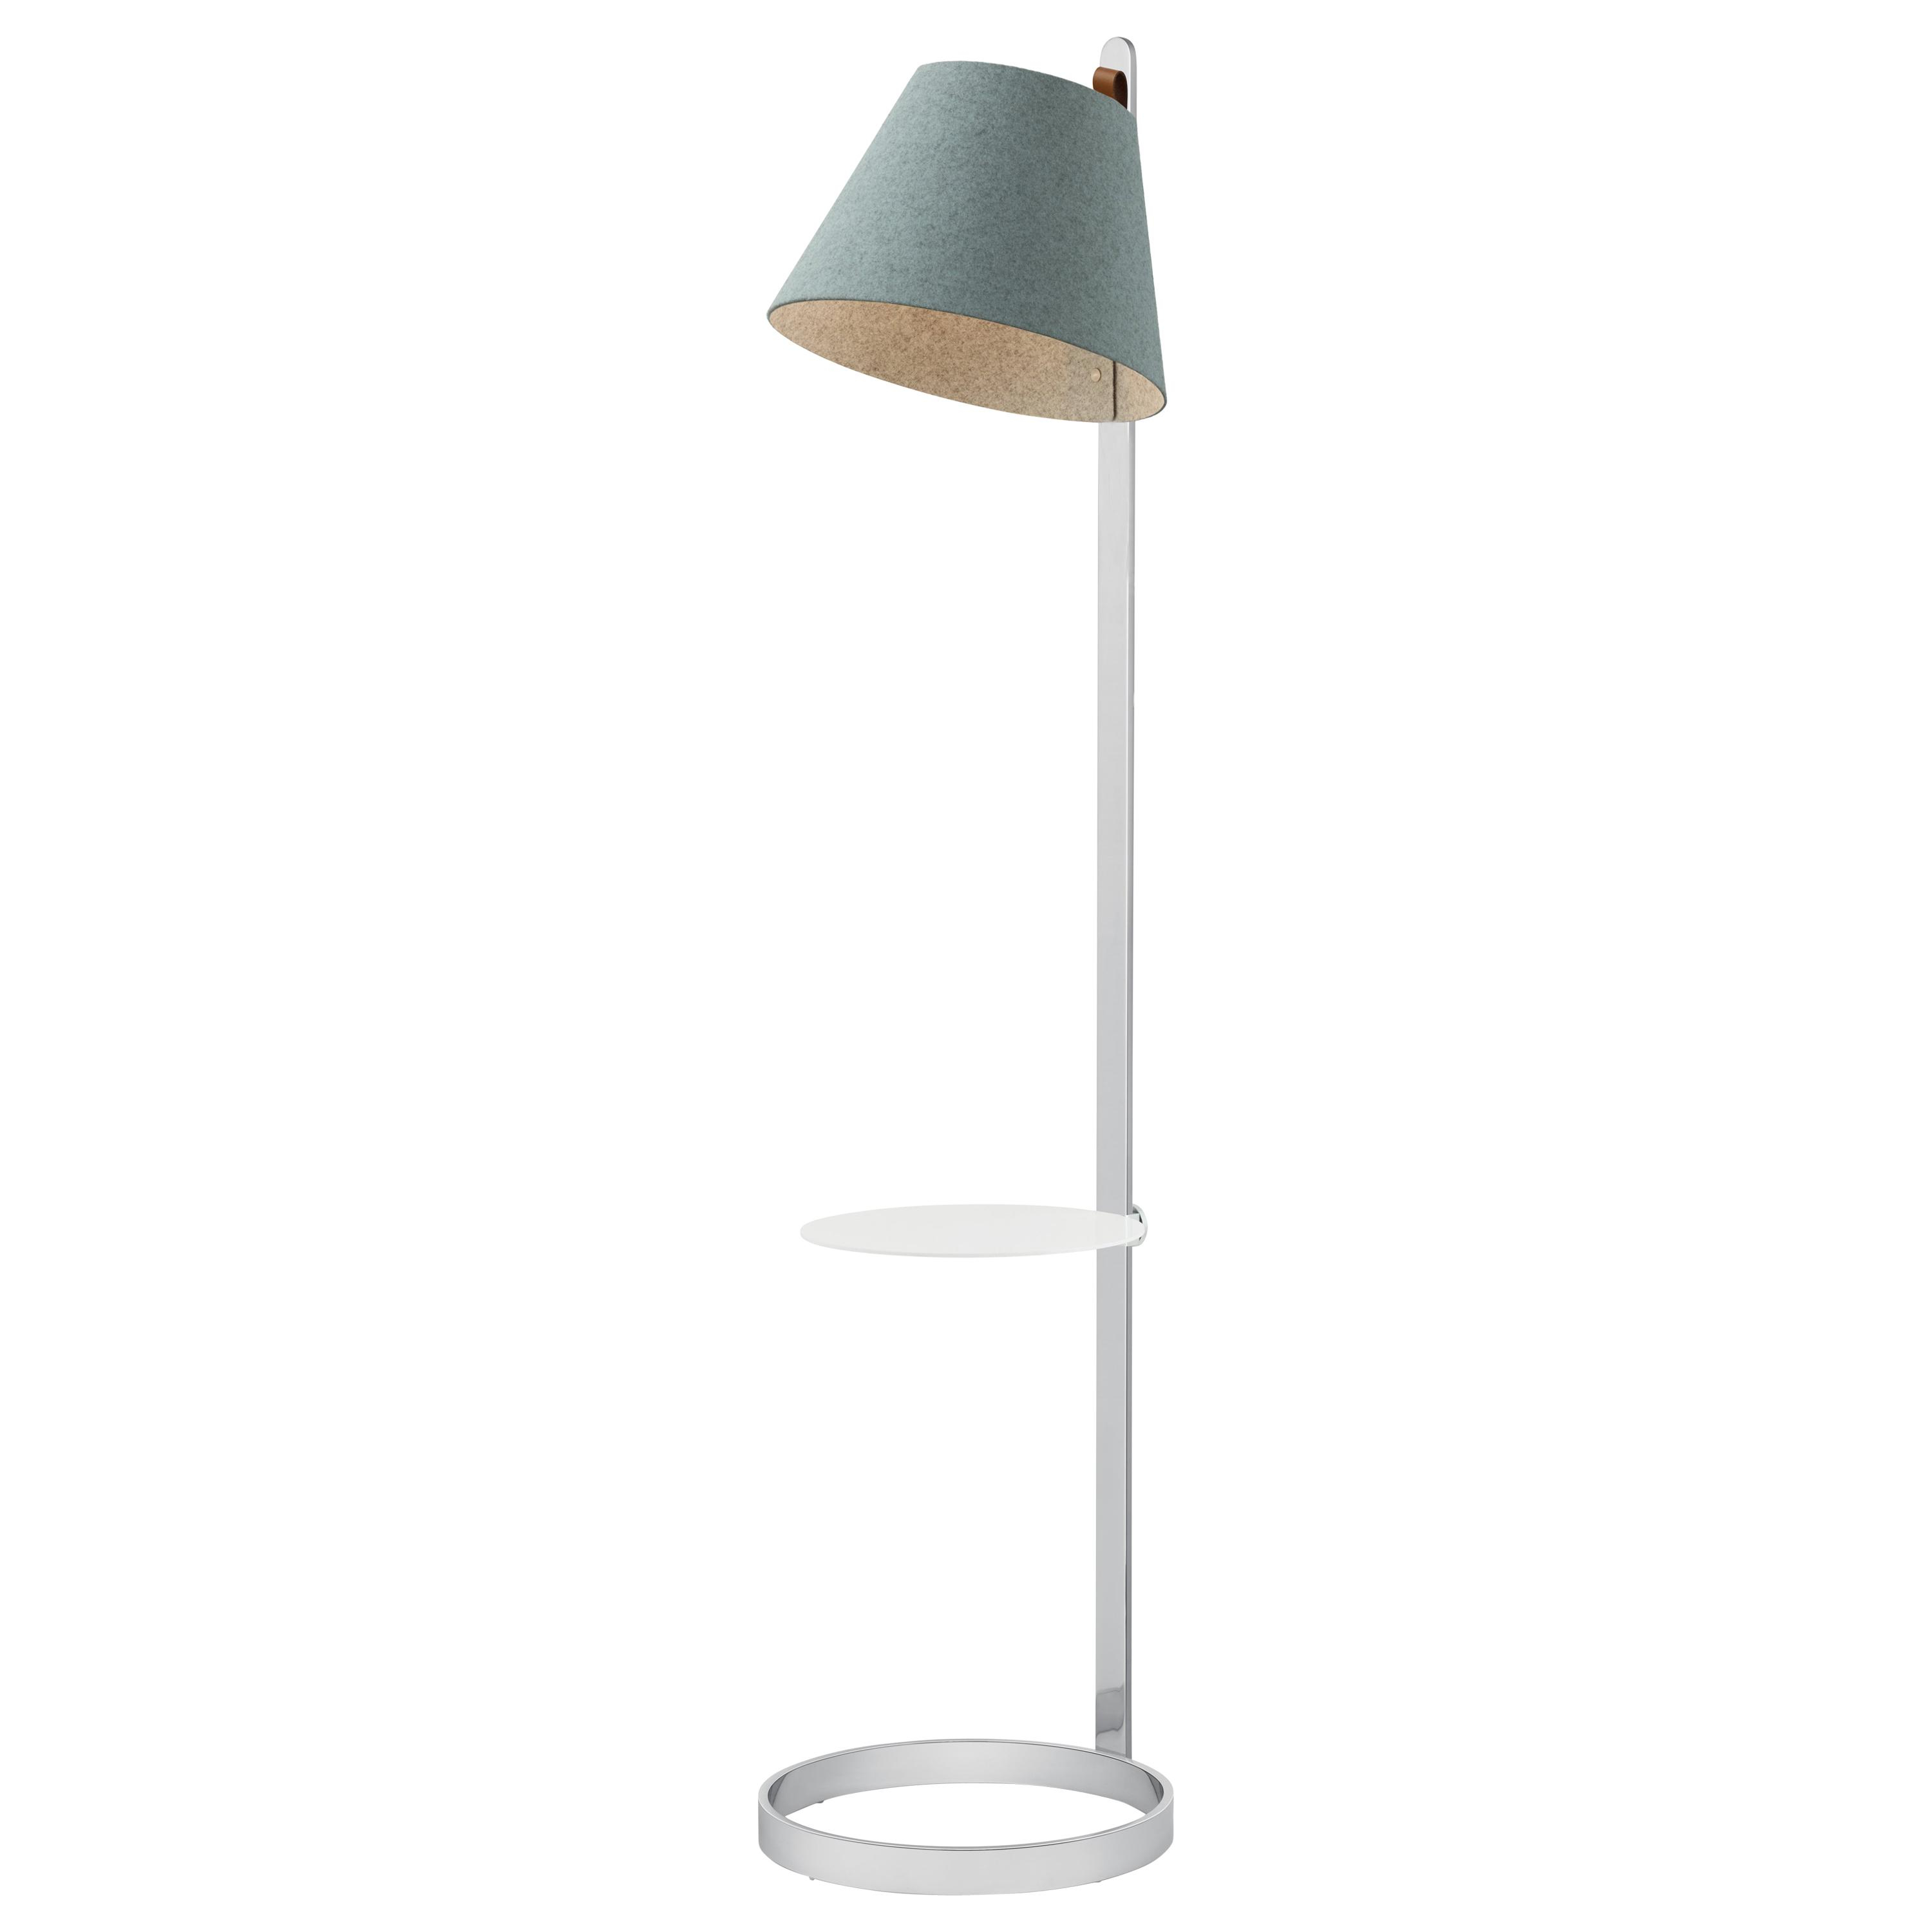 Lana Floor Lamp In Arctic Blue Grey With Tray Chrome Base Pablo Designs regarding dimensions 3000 X 3000